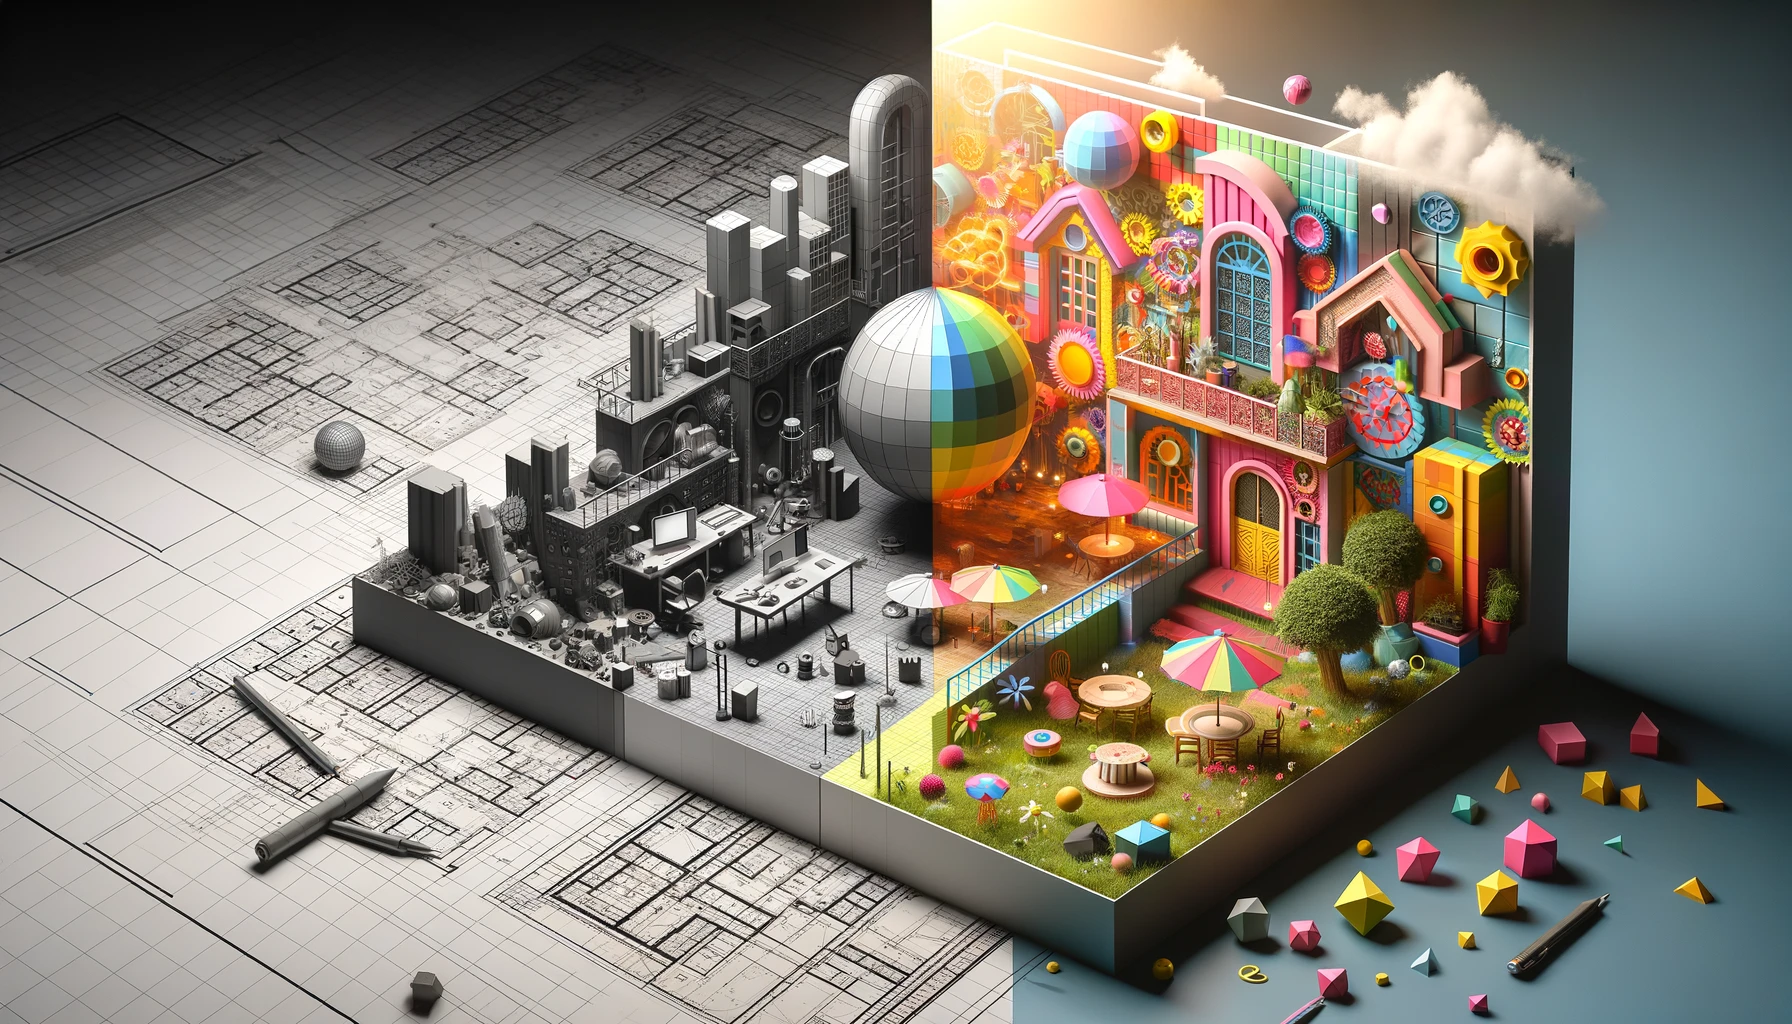 Split scene image depicting the transition from traditional CAD design, shown in grayscale with architectural blueprints, to vibrant, real-time 3D rendering, featuring colorful, detailed textures and immersive environments.